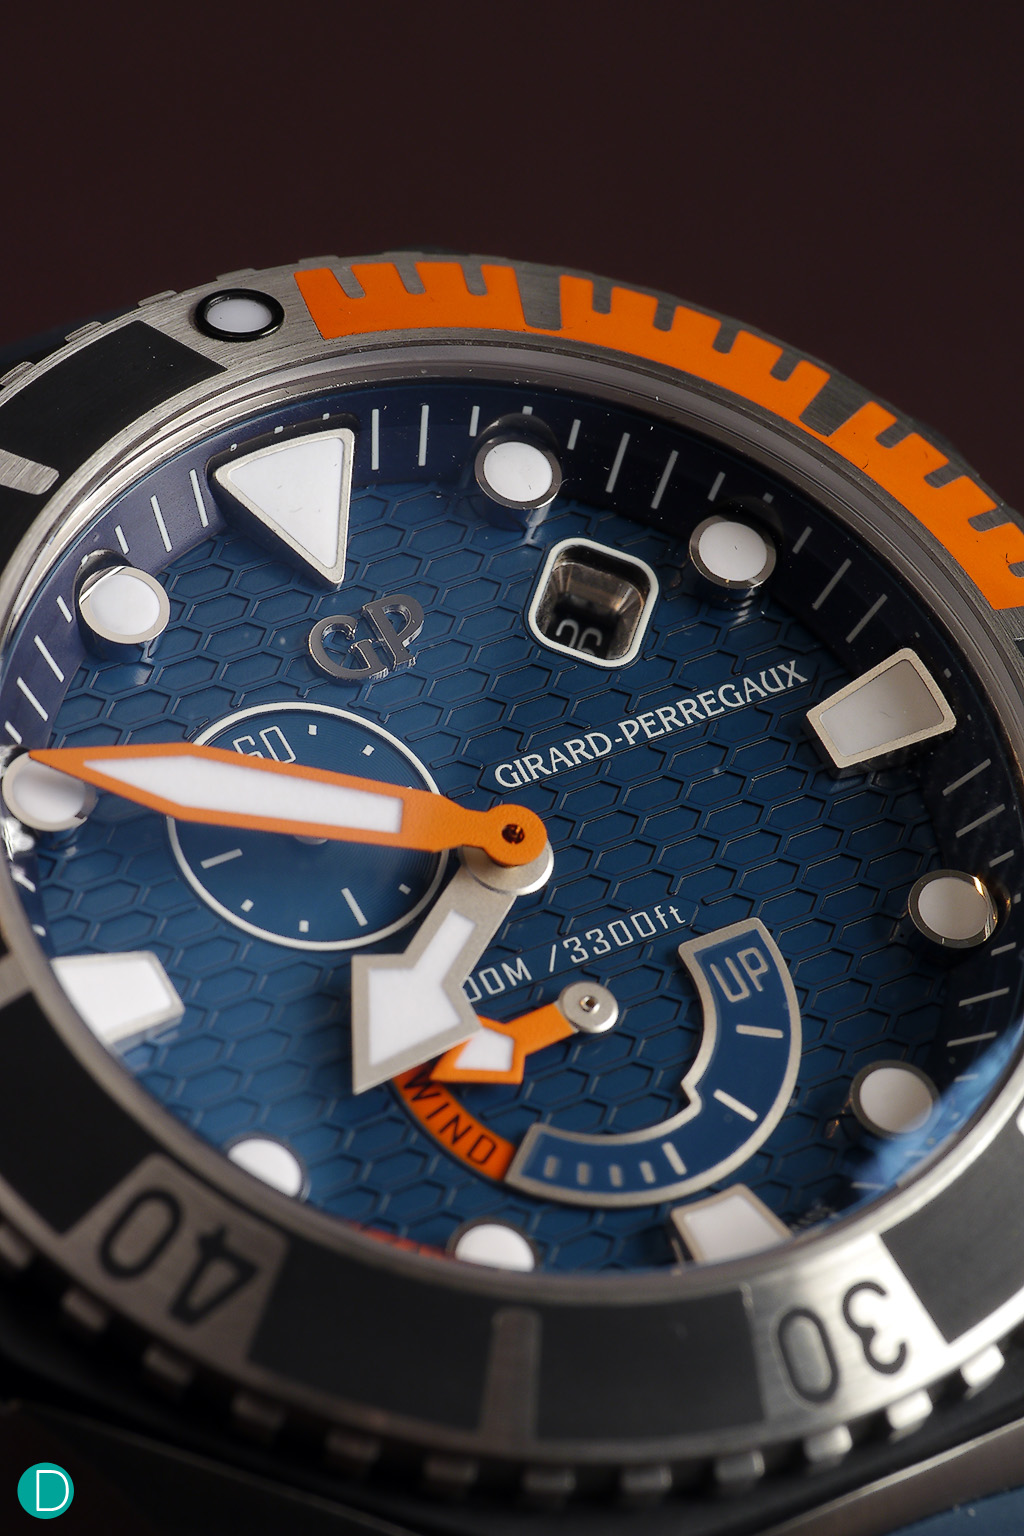 If the design brief calls for a watch, with a bulbous case, a crown at the 4 o'clock position, bulky to withstand diving pressures, it would be easy to fall prey to a poorly visual design. But not for GP. The Sea Hawk still manages to remain elegant, visually arresting, and beautiful.